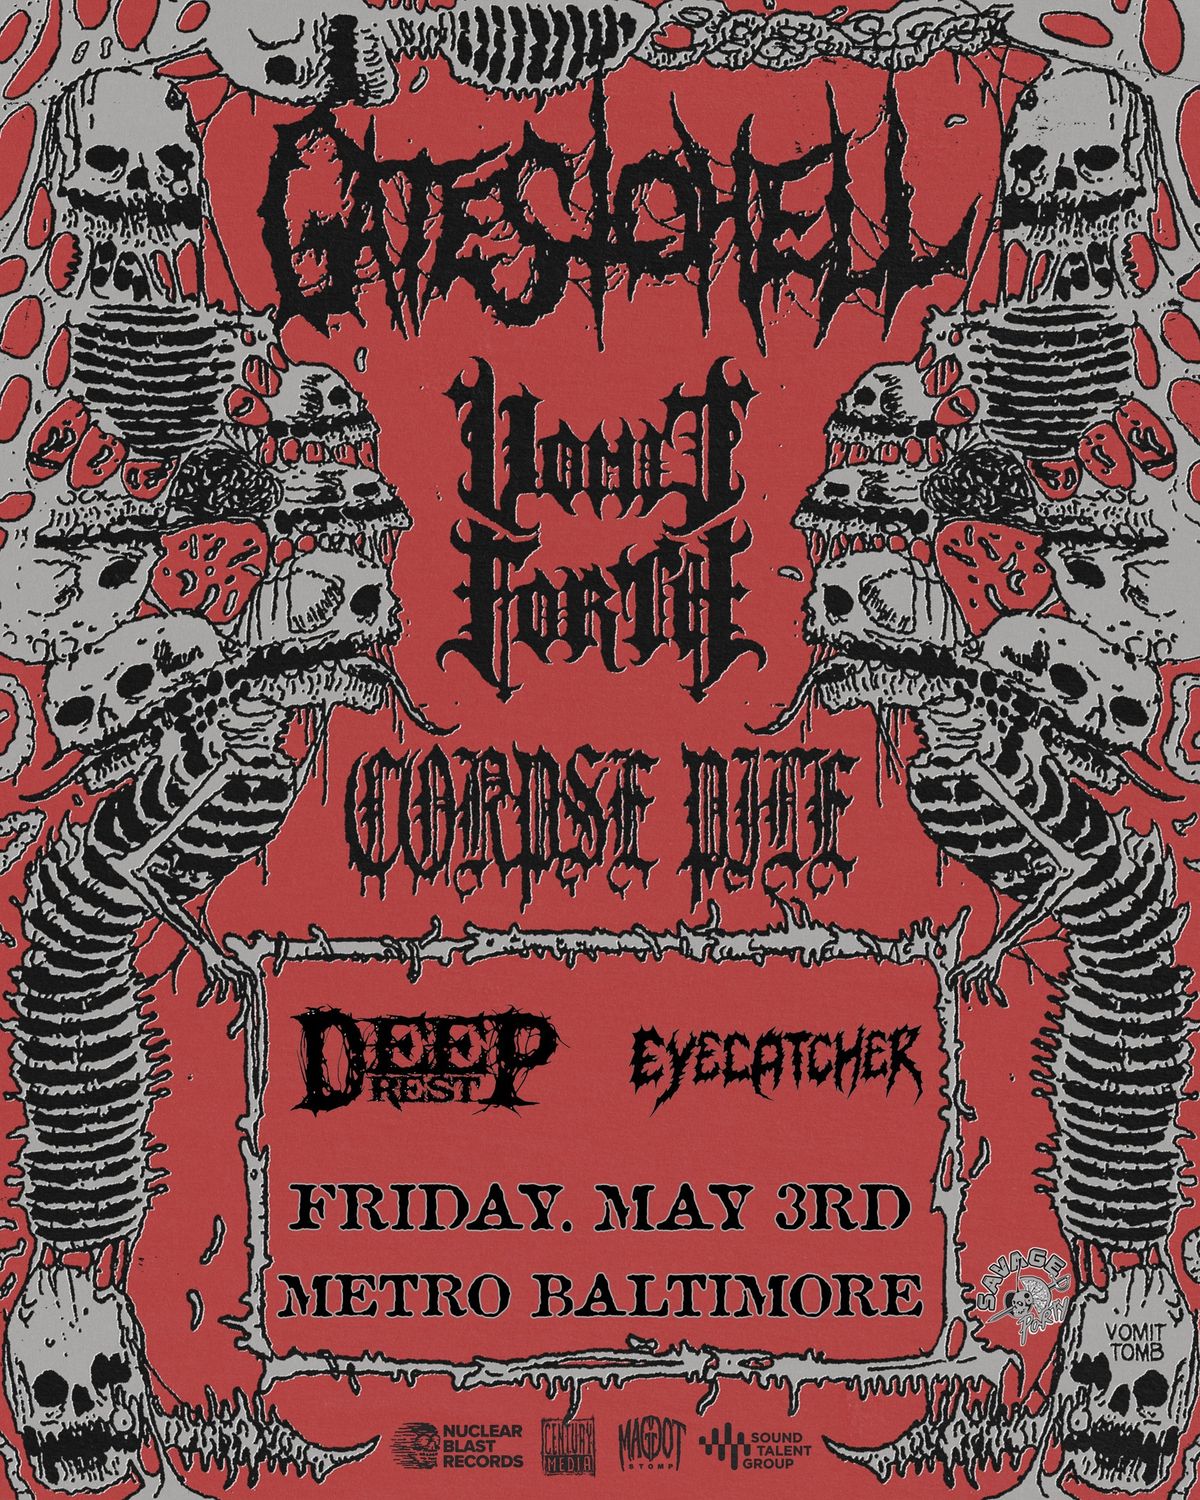 GATES TO HELL w\/ Vomit Forth, Corpse Pile, Deep Rest and Eyecatcher @ Metro Baltimore 